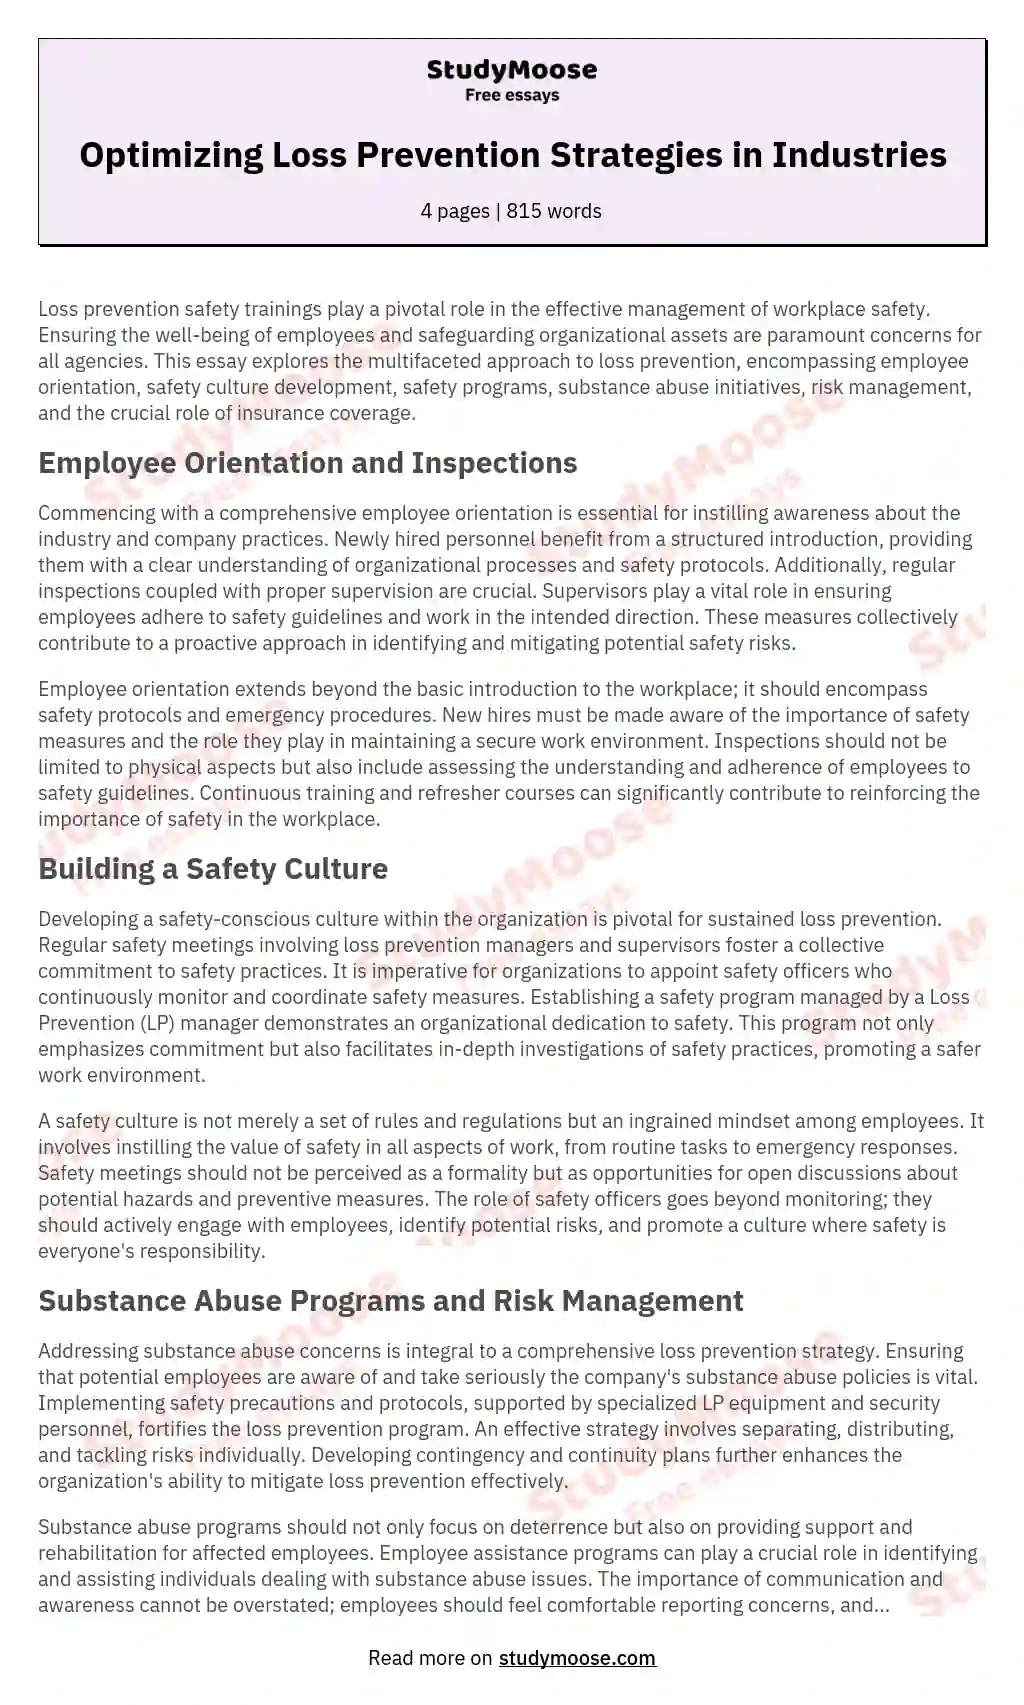 Optimizing Loss Prevention Strategies in Industries essay